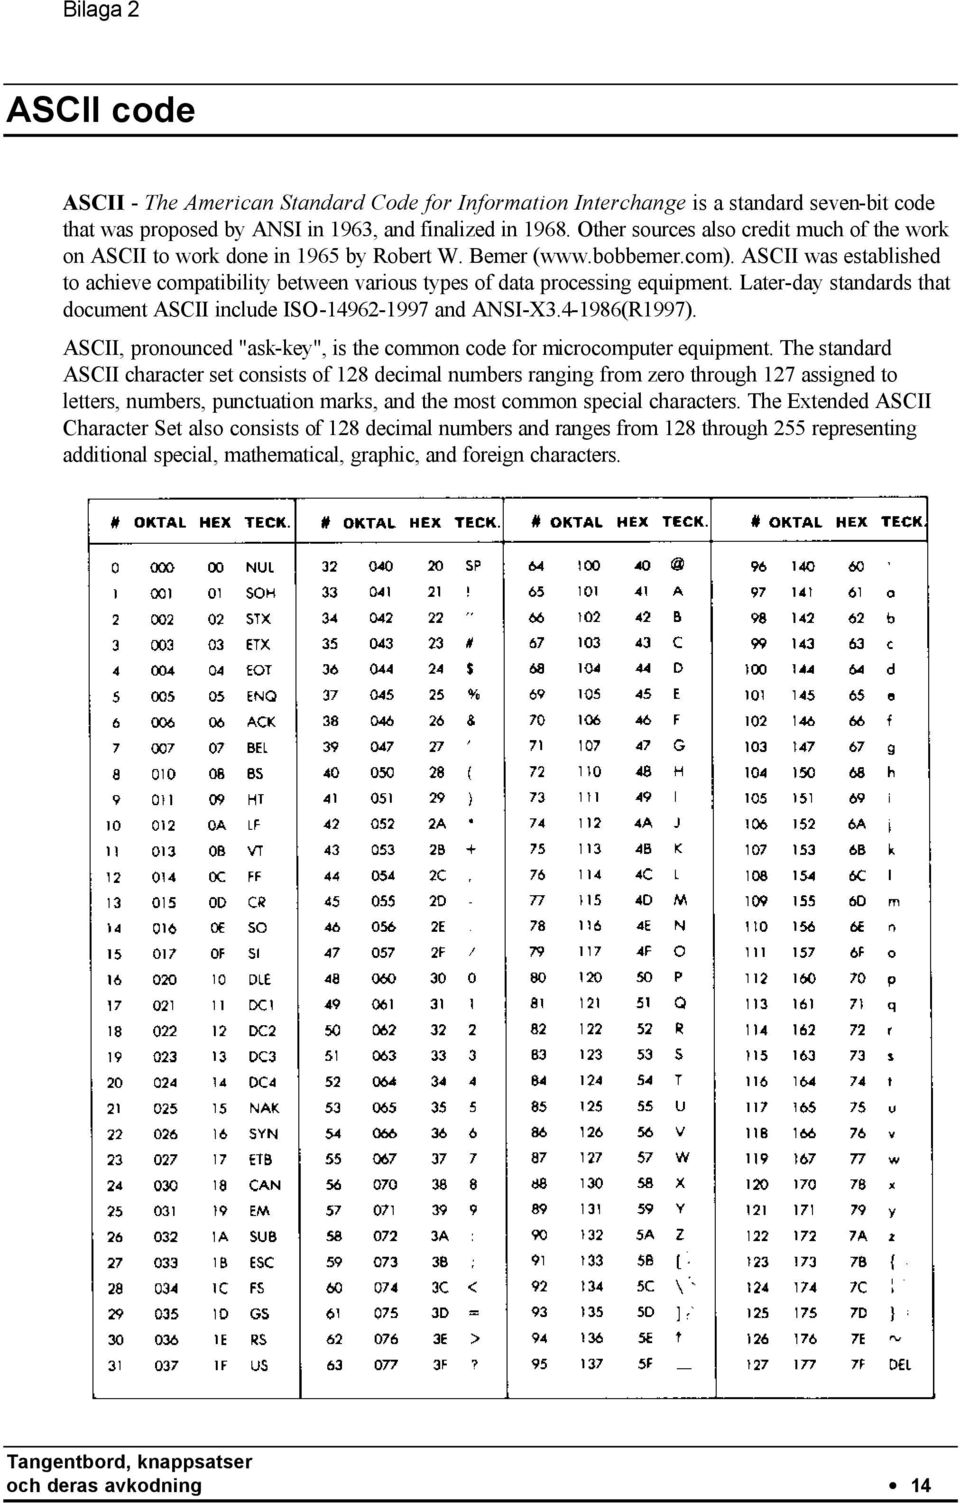 ASCII was established to achieve compatibility between various types of data processing equipment. Later-day standards that document ASCII include ISO-14962-199 and ANSI-X3.4-1986(R199).